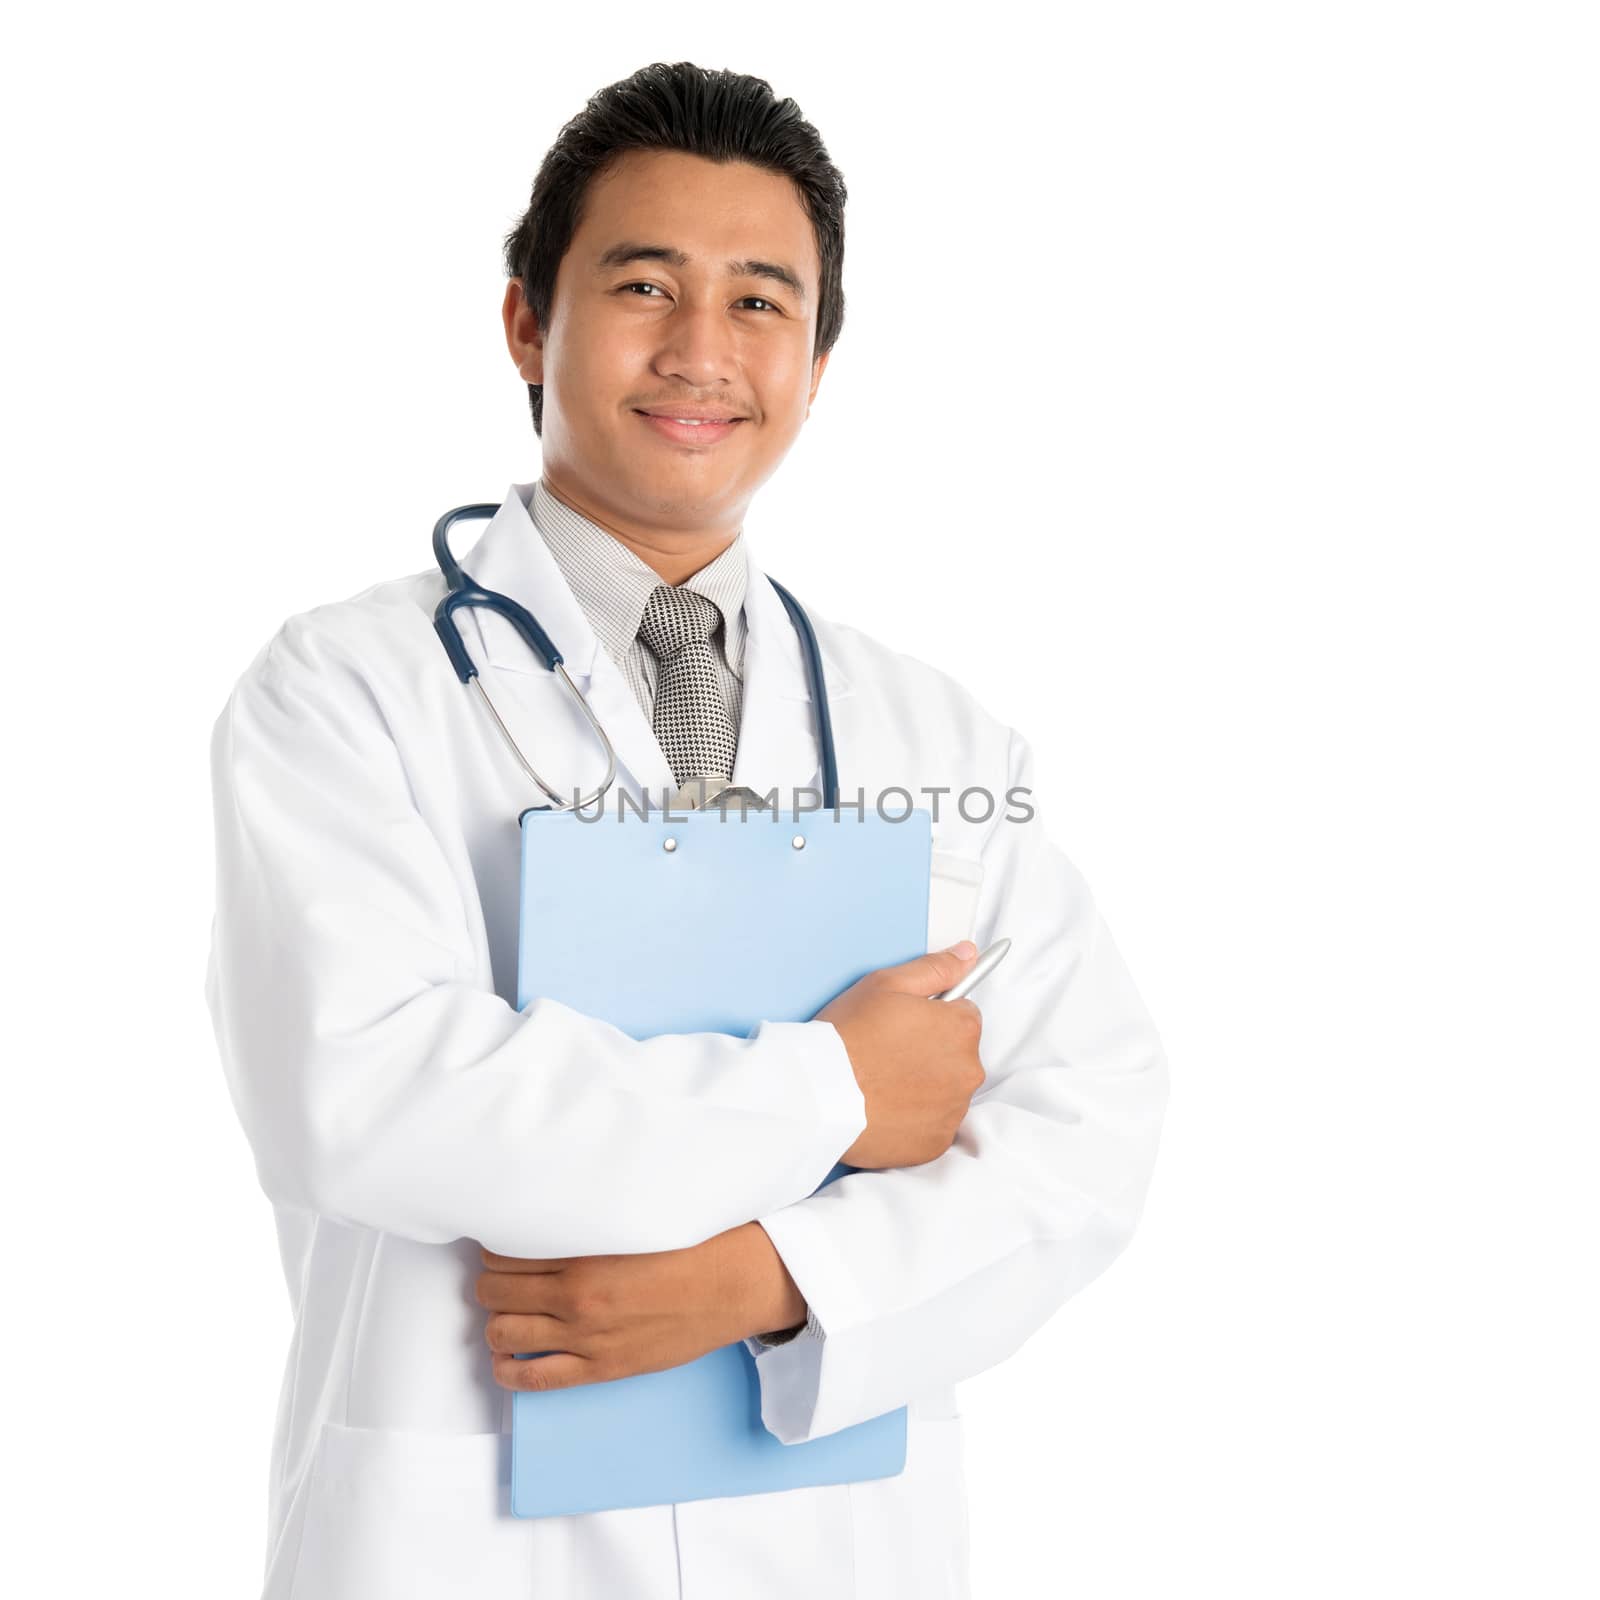 Portrait of southeast Asian male medical doctor holding file folder, standing isolated on white background. Young man model.